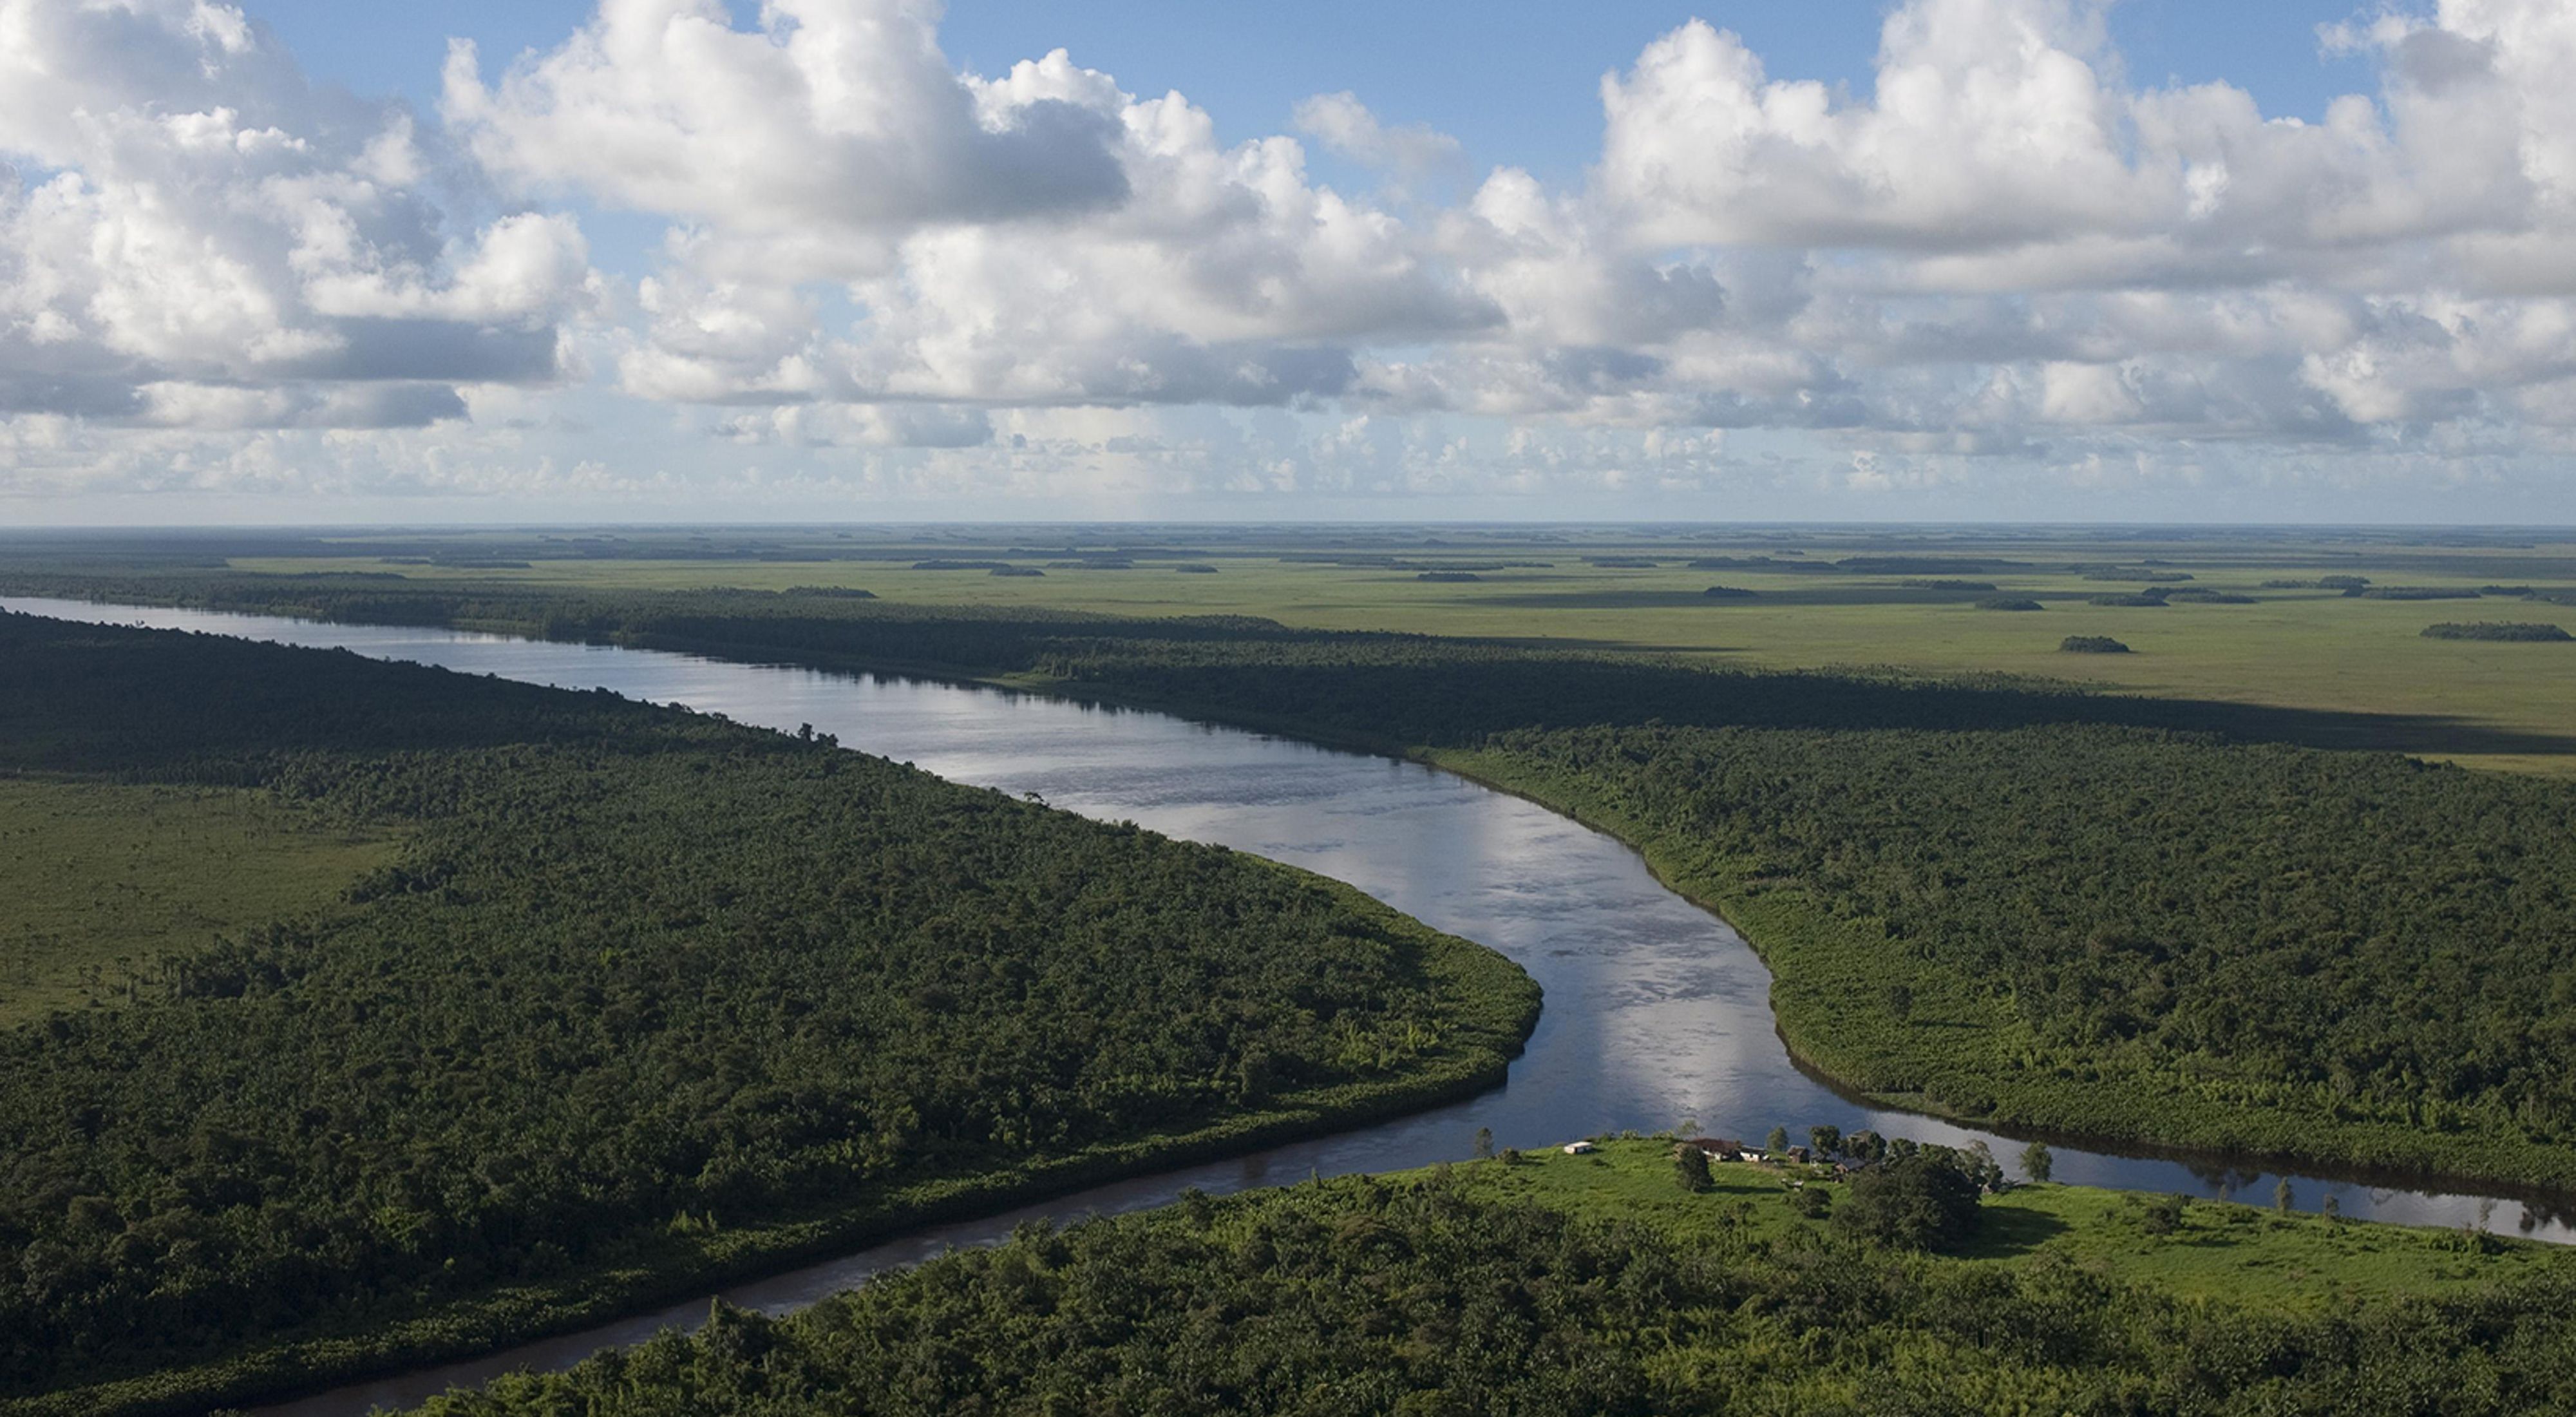 The Rio Curipí meets the Rio Uaçá on its way to the Atlantic Ocean, in the Oiapoque indigenous region of the Brazilian Amazon. 